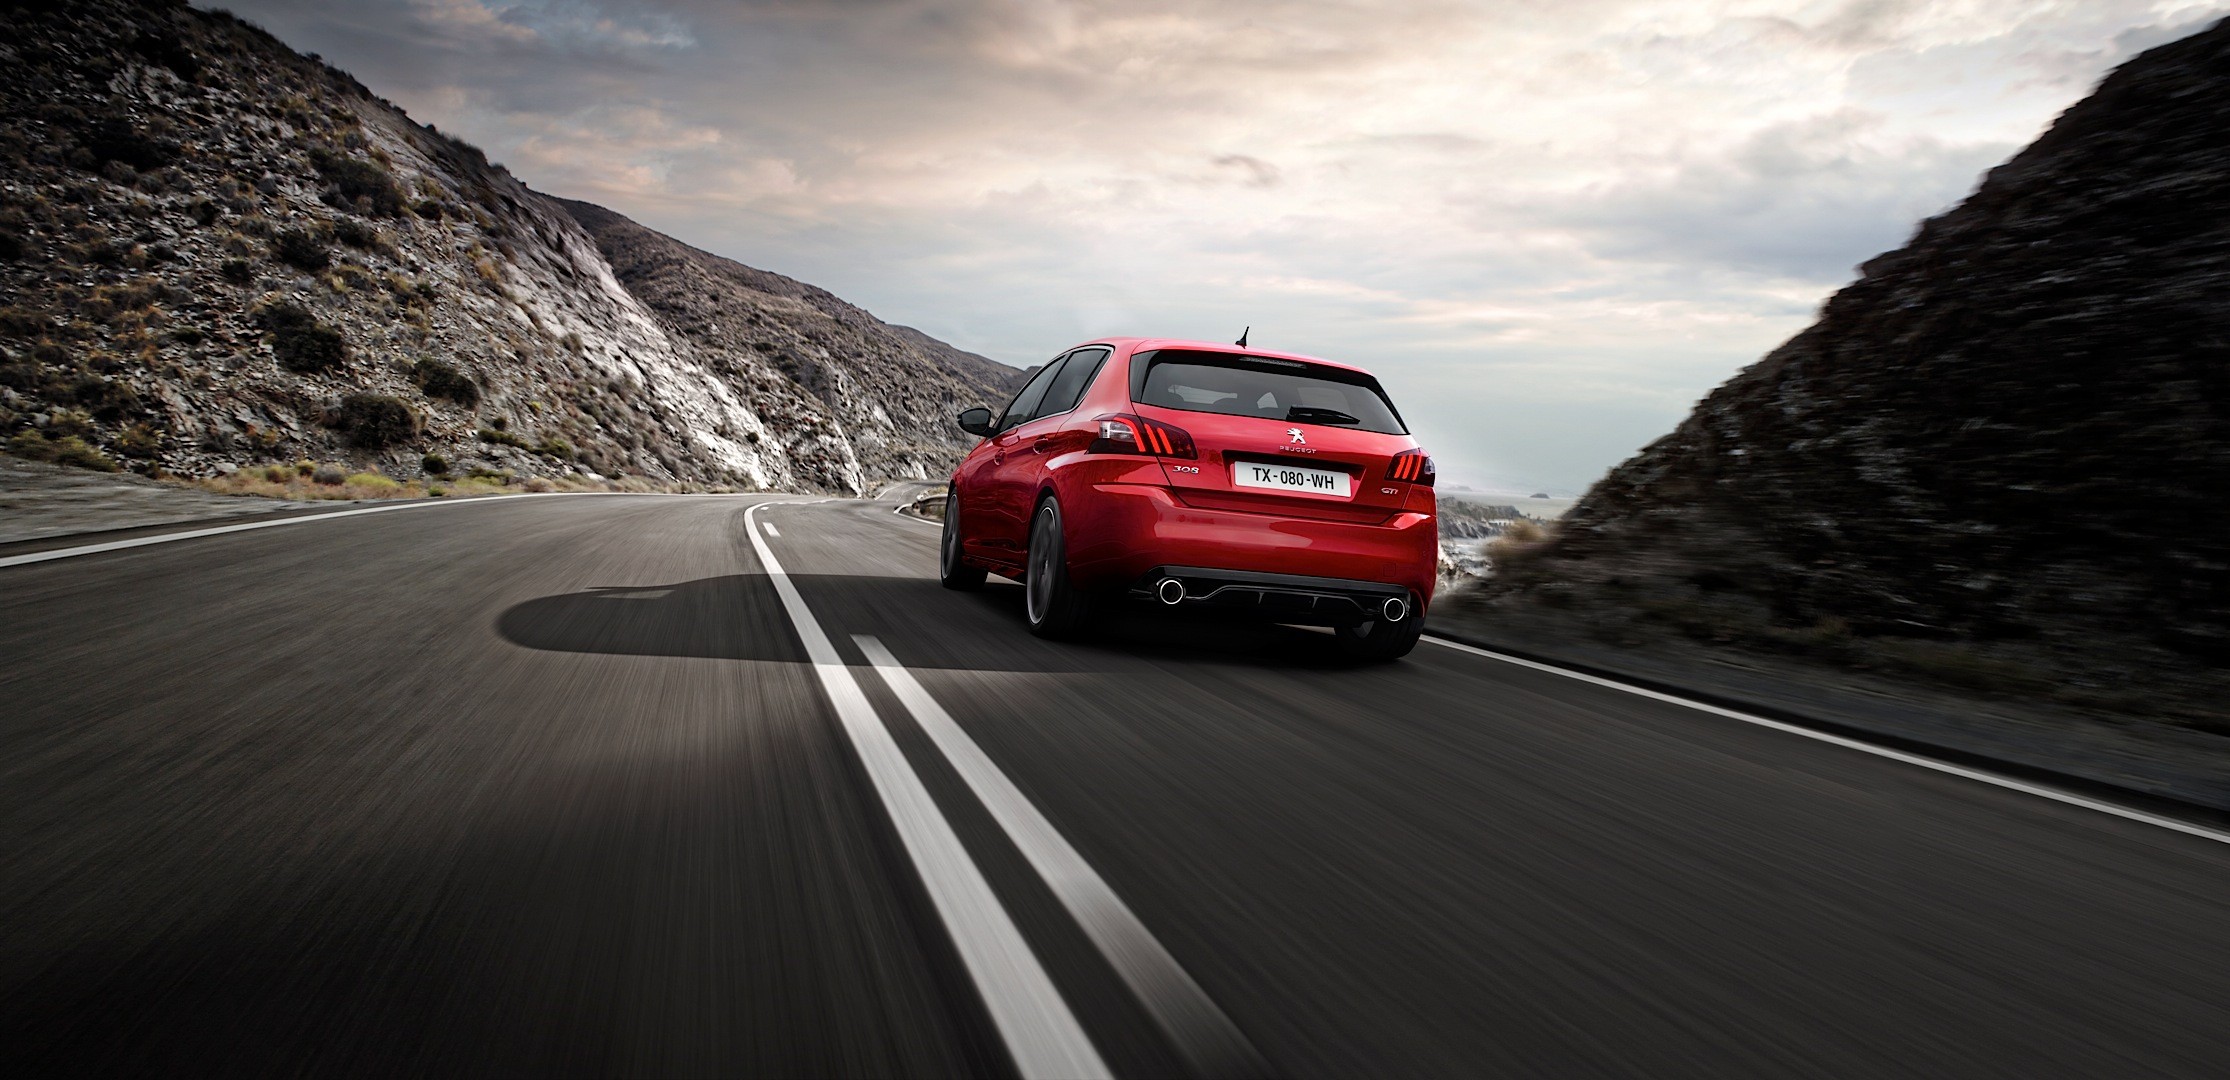 Early Reveal For New Peugeot 308 GTi With Up To 270PS